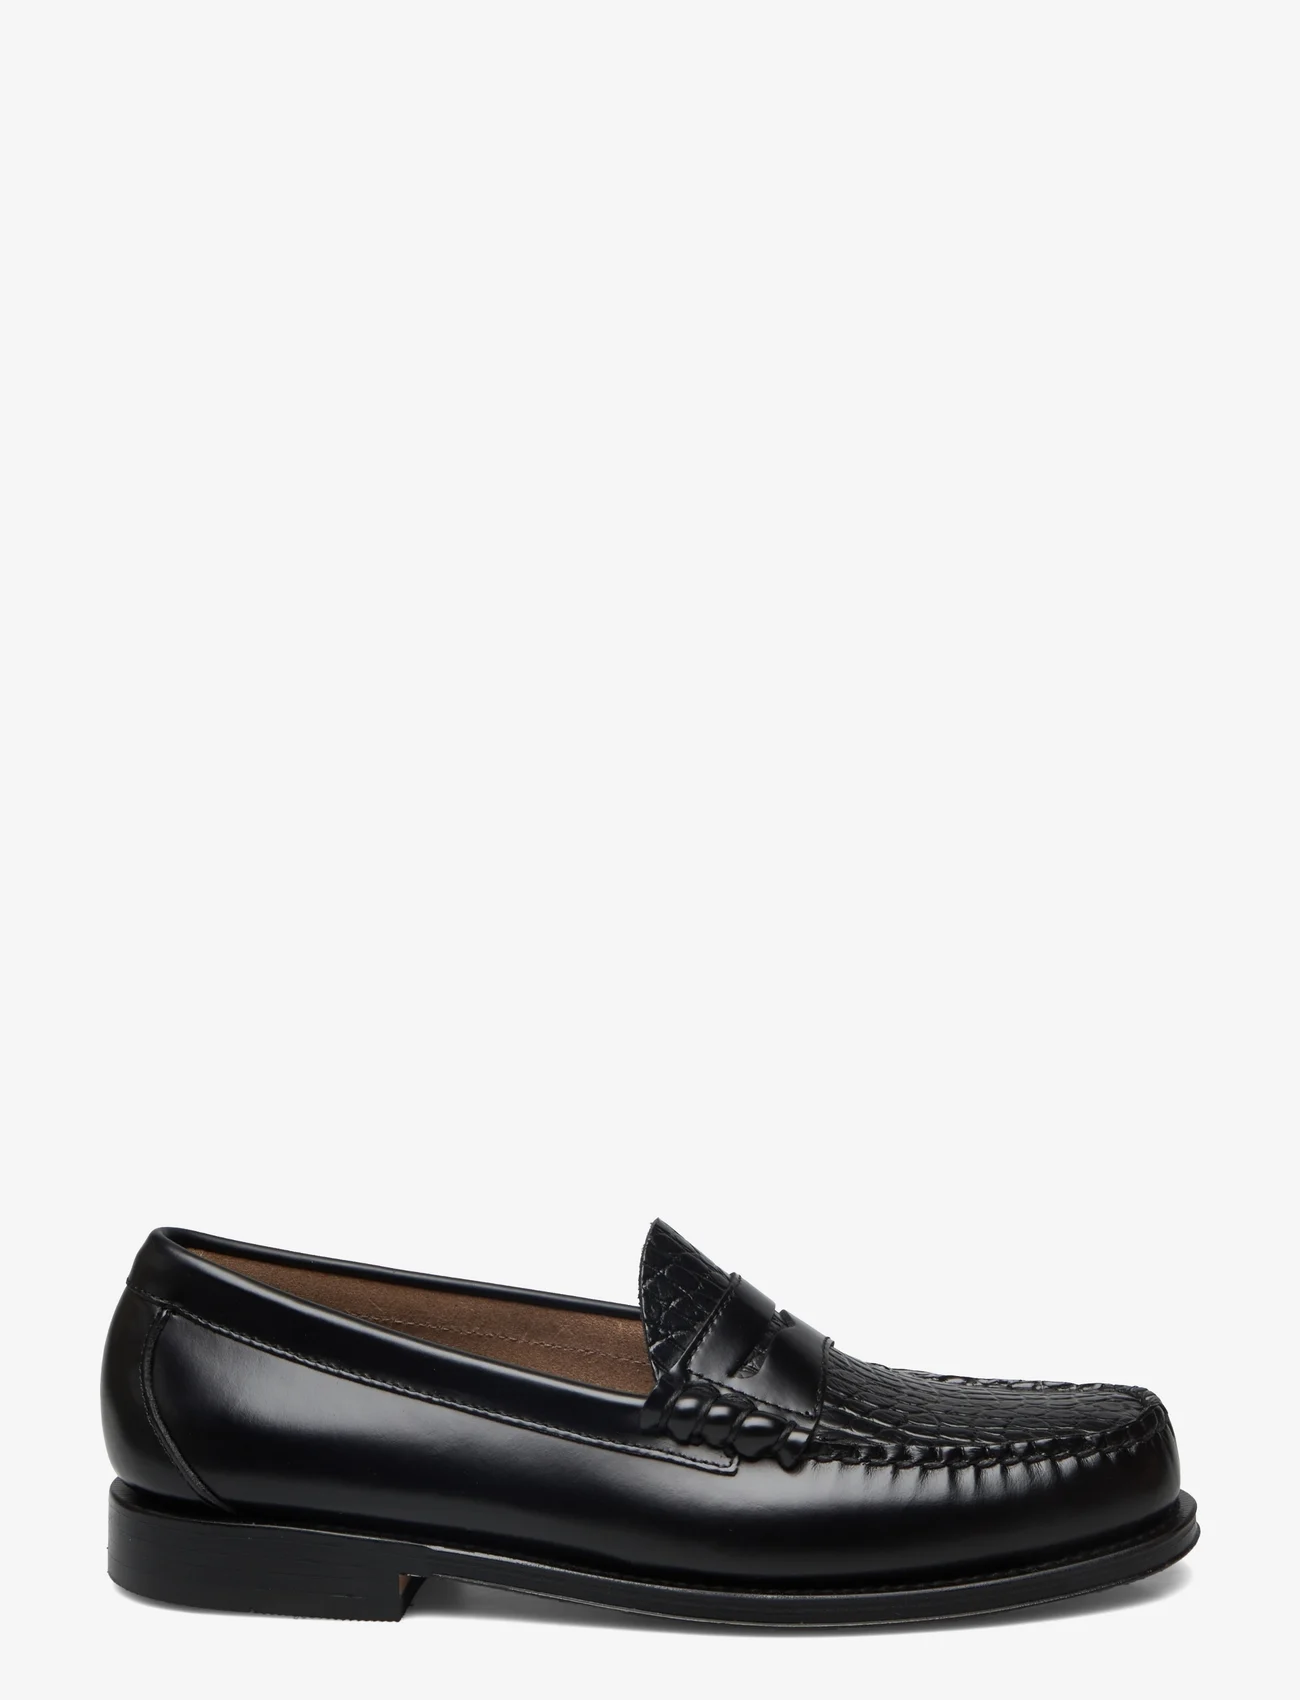 Weejuns Larson Penny Loafers | lupon.gov.ph